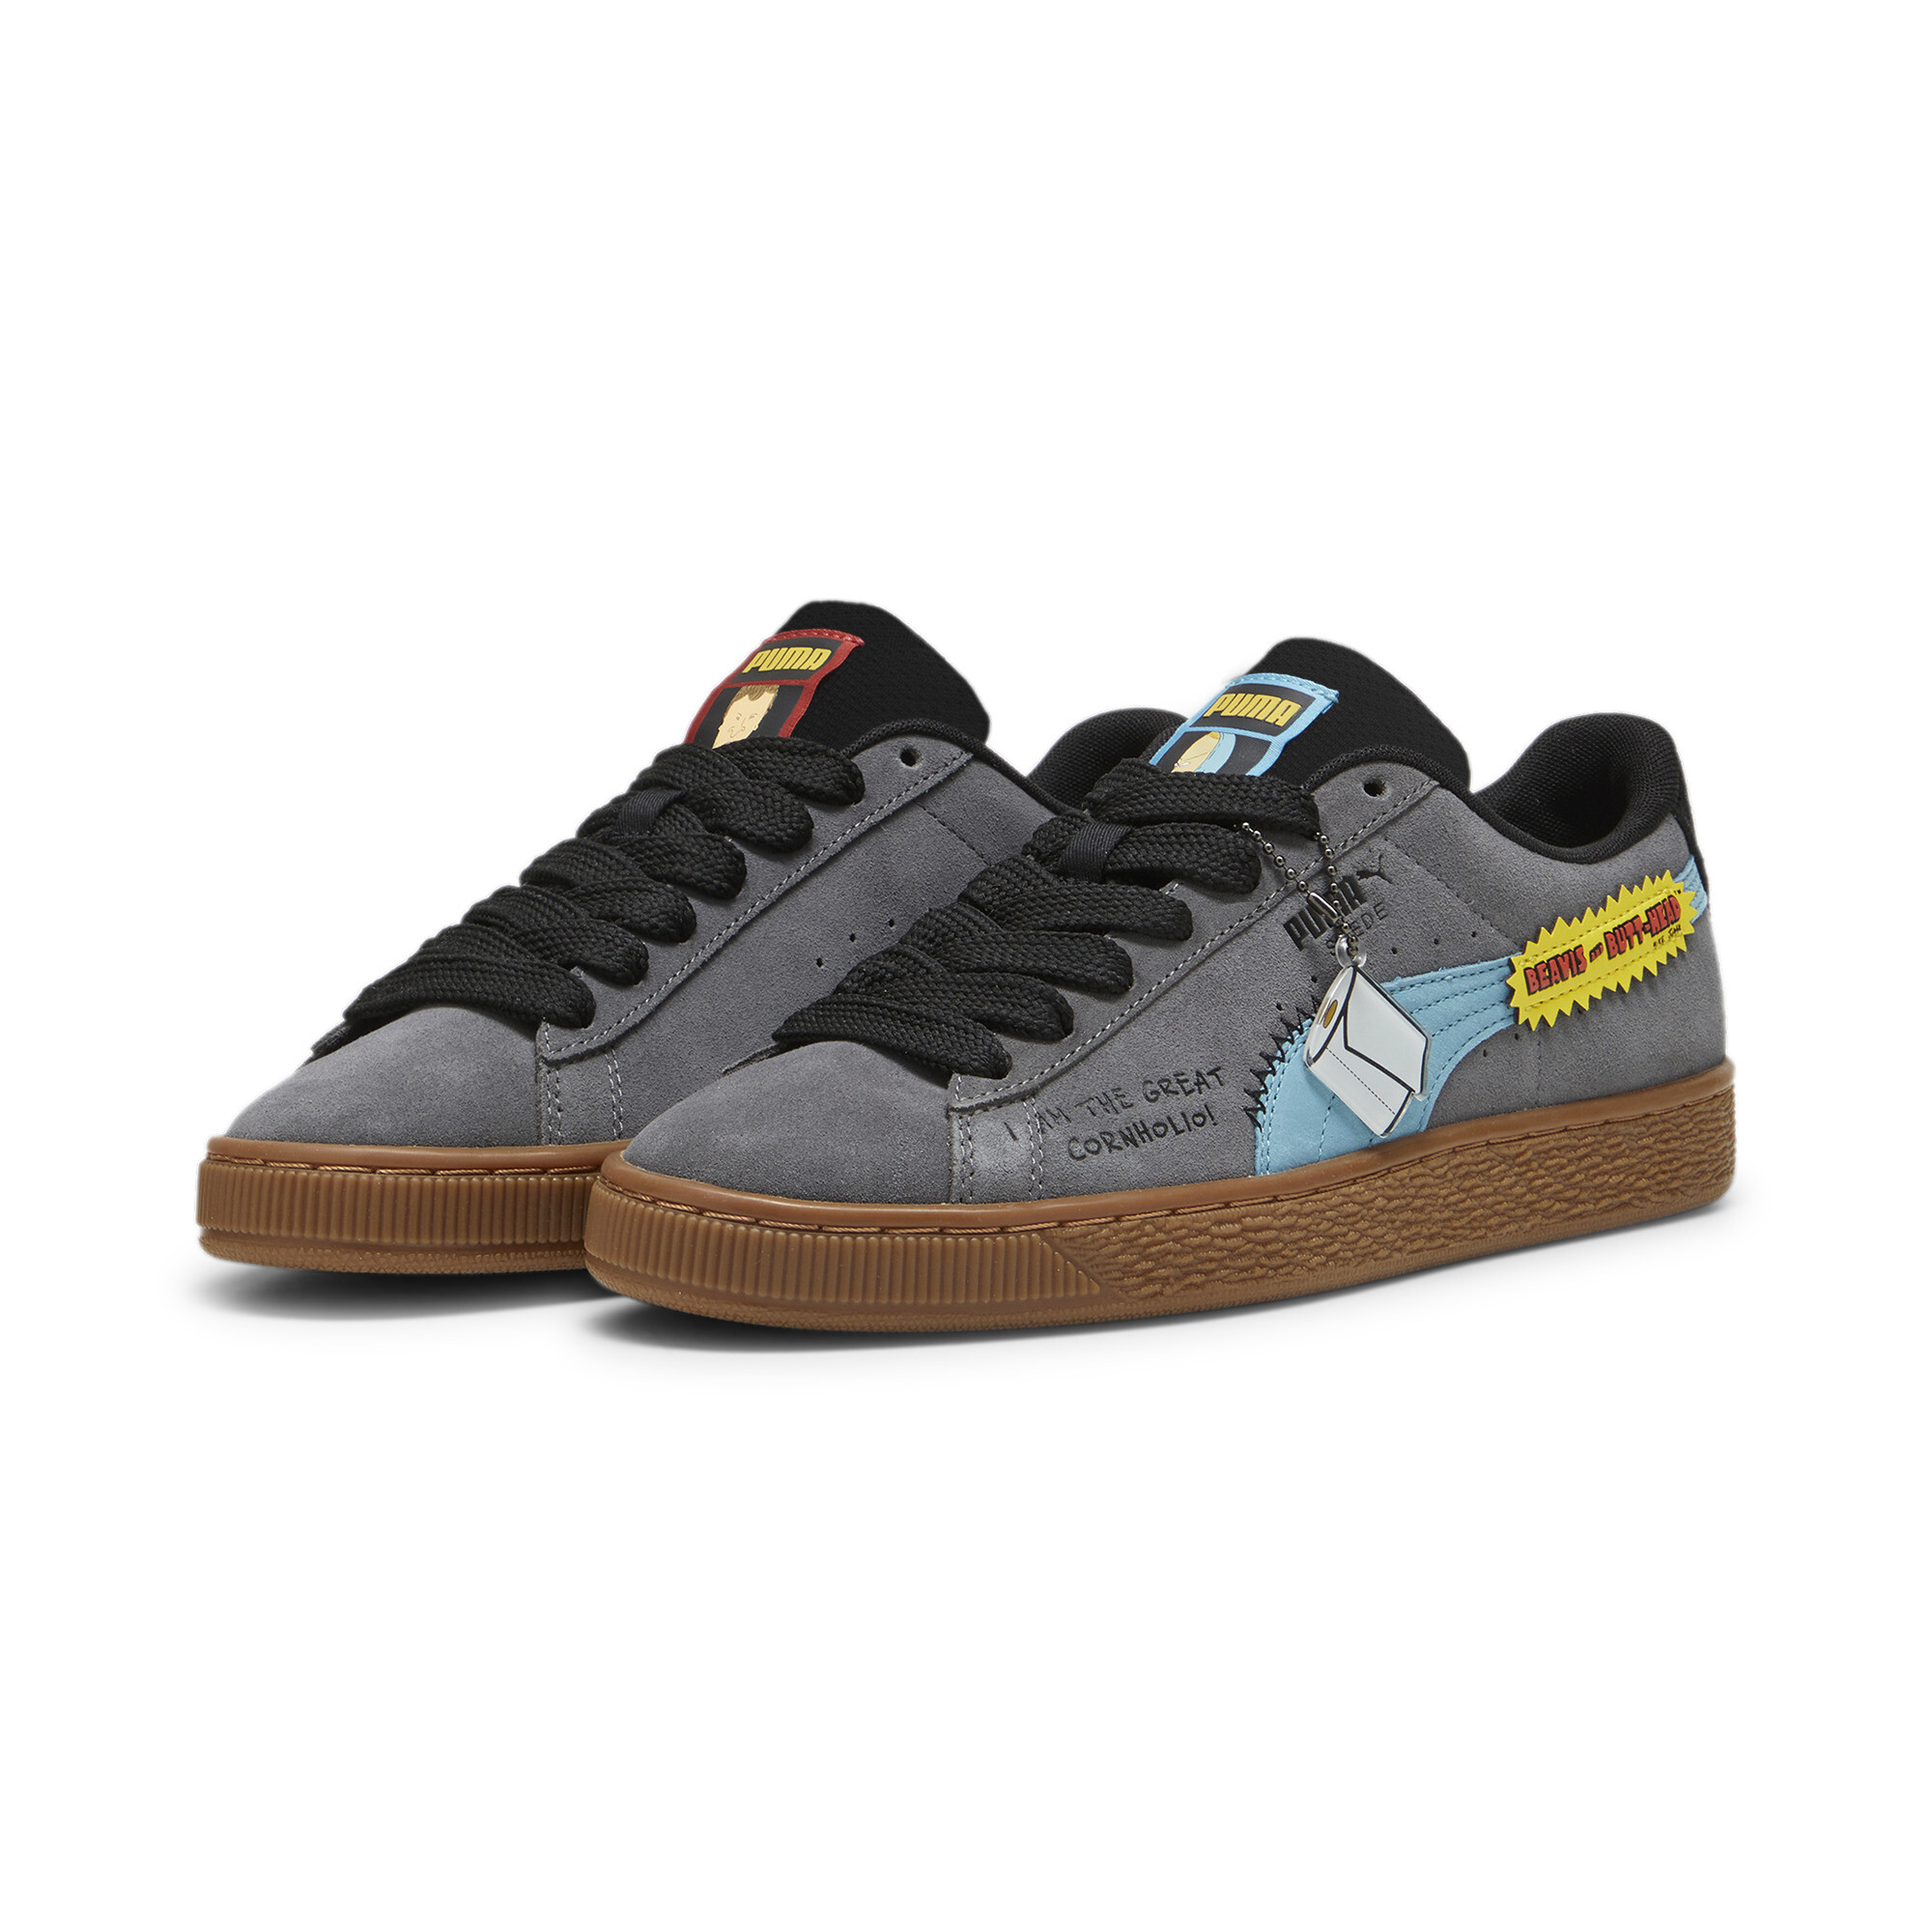 Kids' PUMA X BEAVIS AND BUTTHEAD Suede Sneakers In Gray, Size EU 46